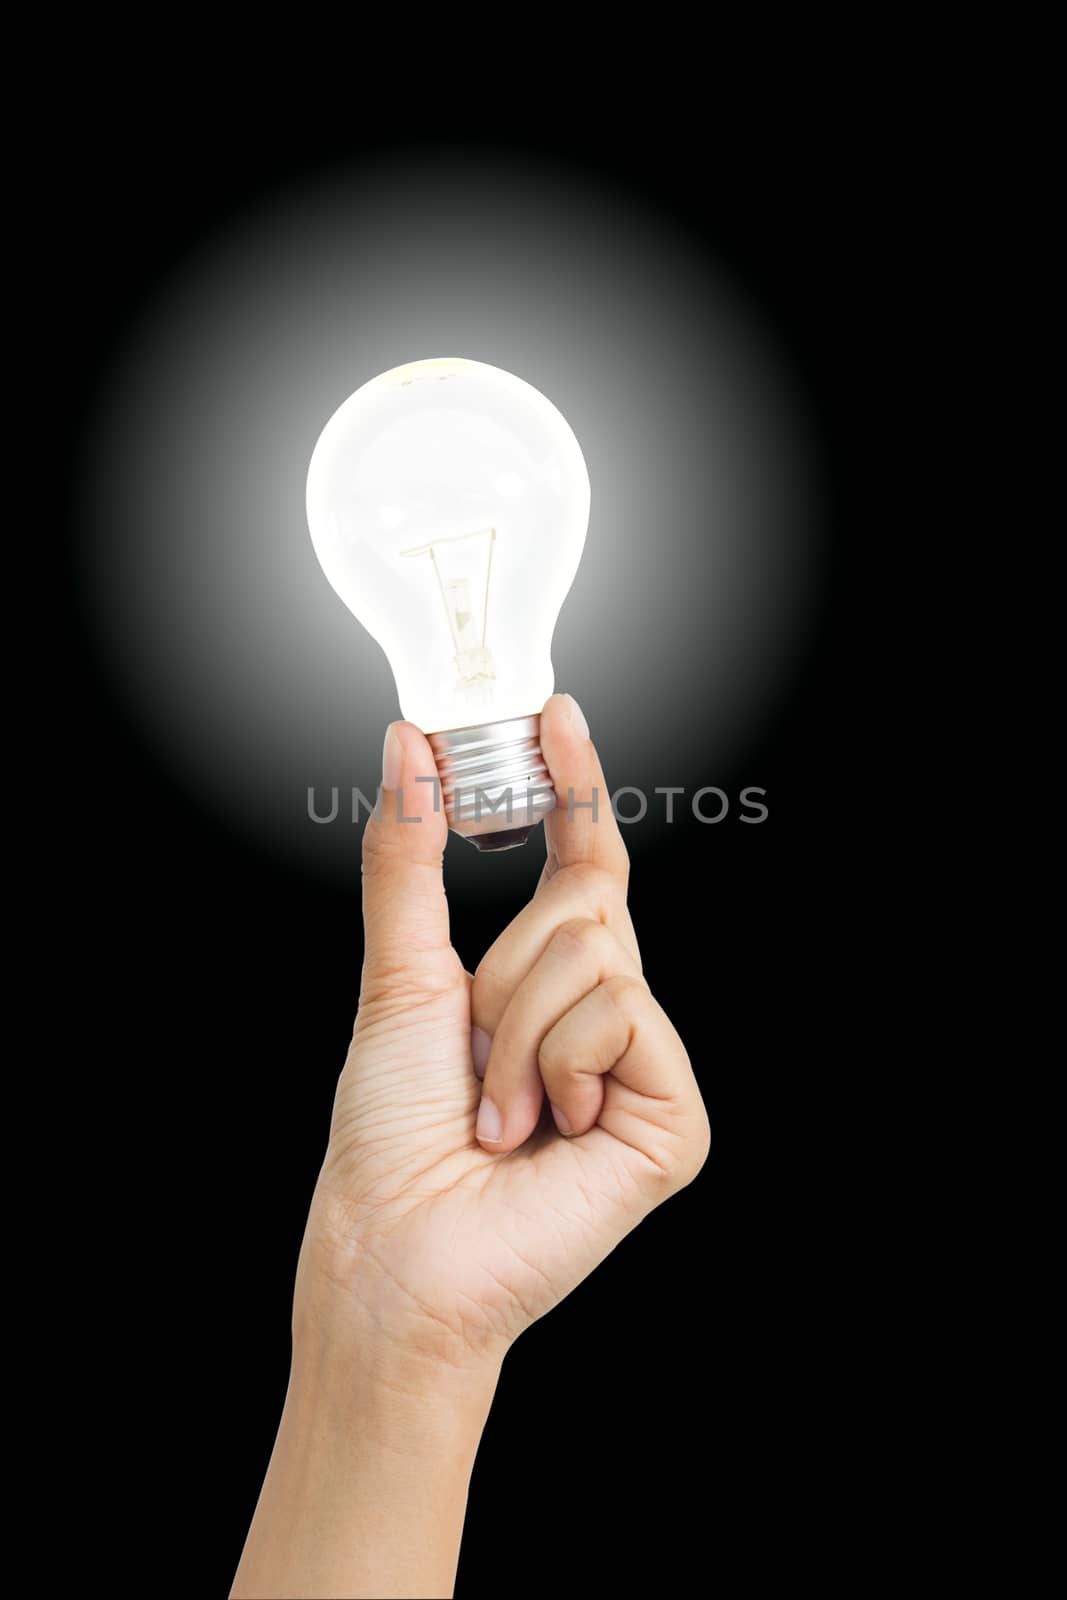 Hand holding light bulb symbolizing help, idea or inspiration by a3701027